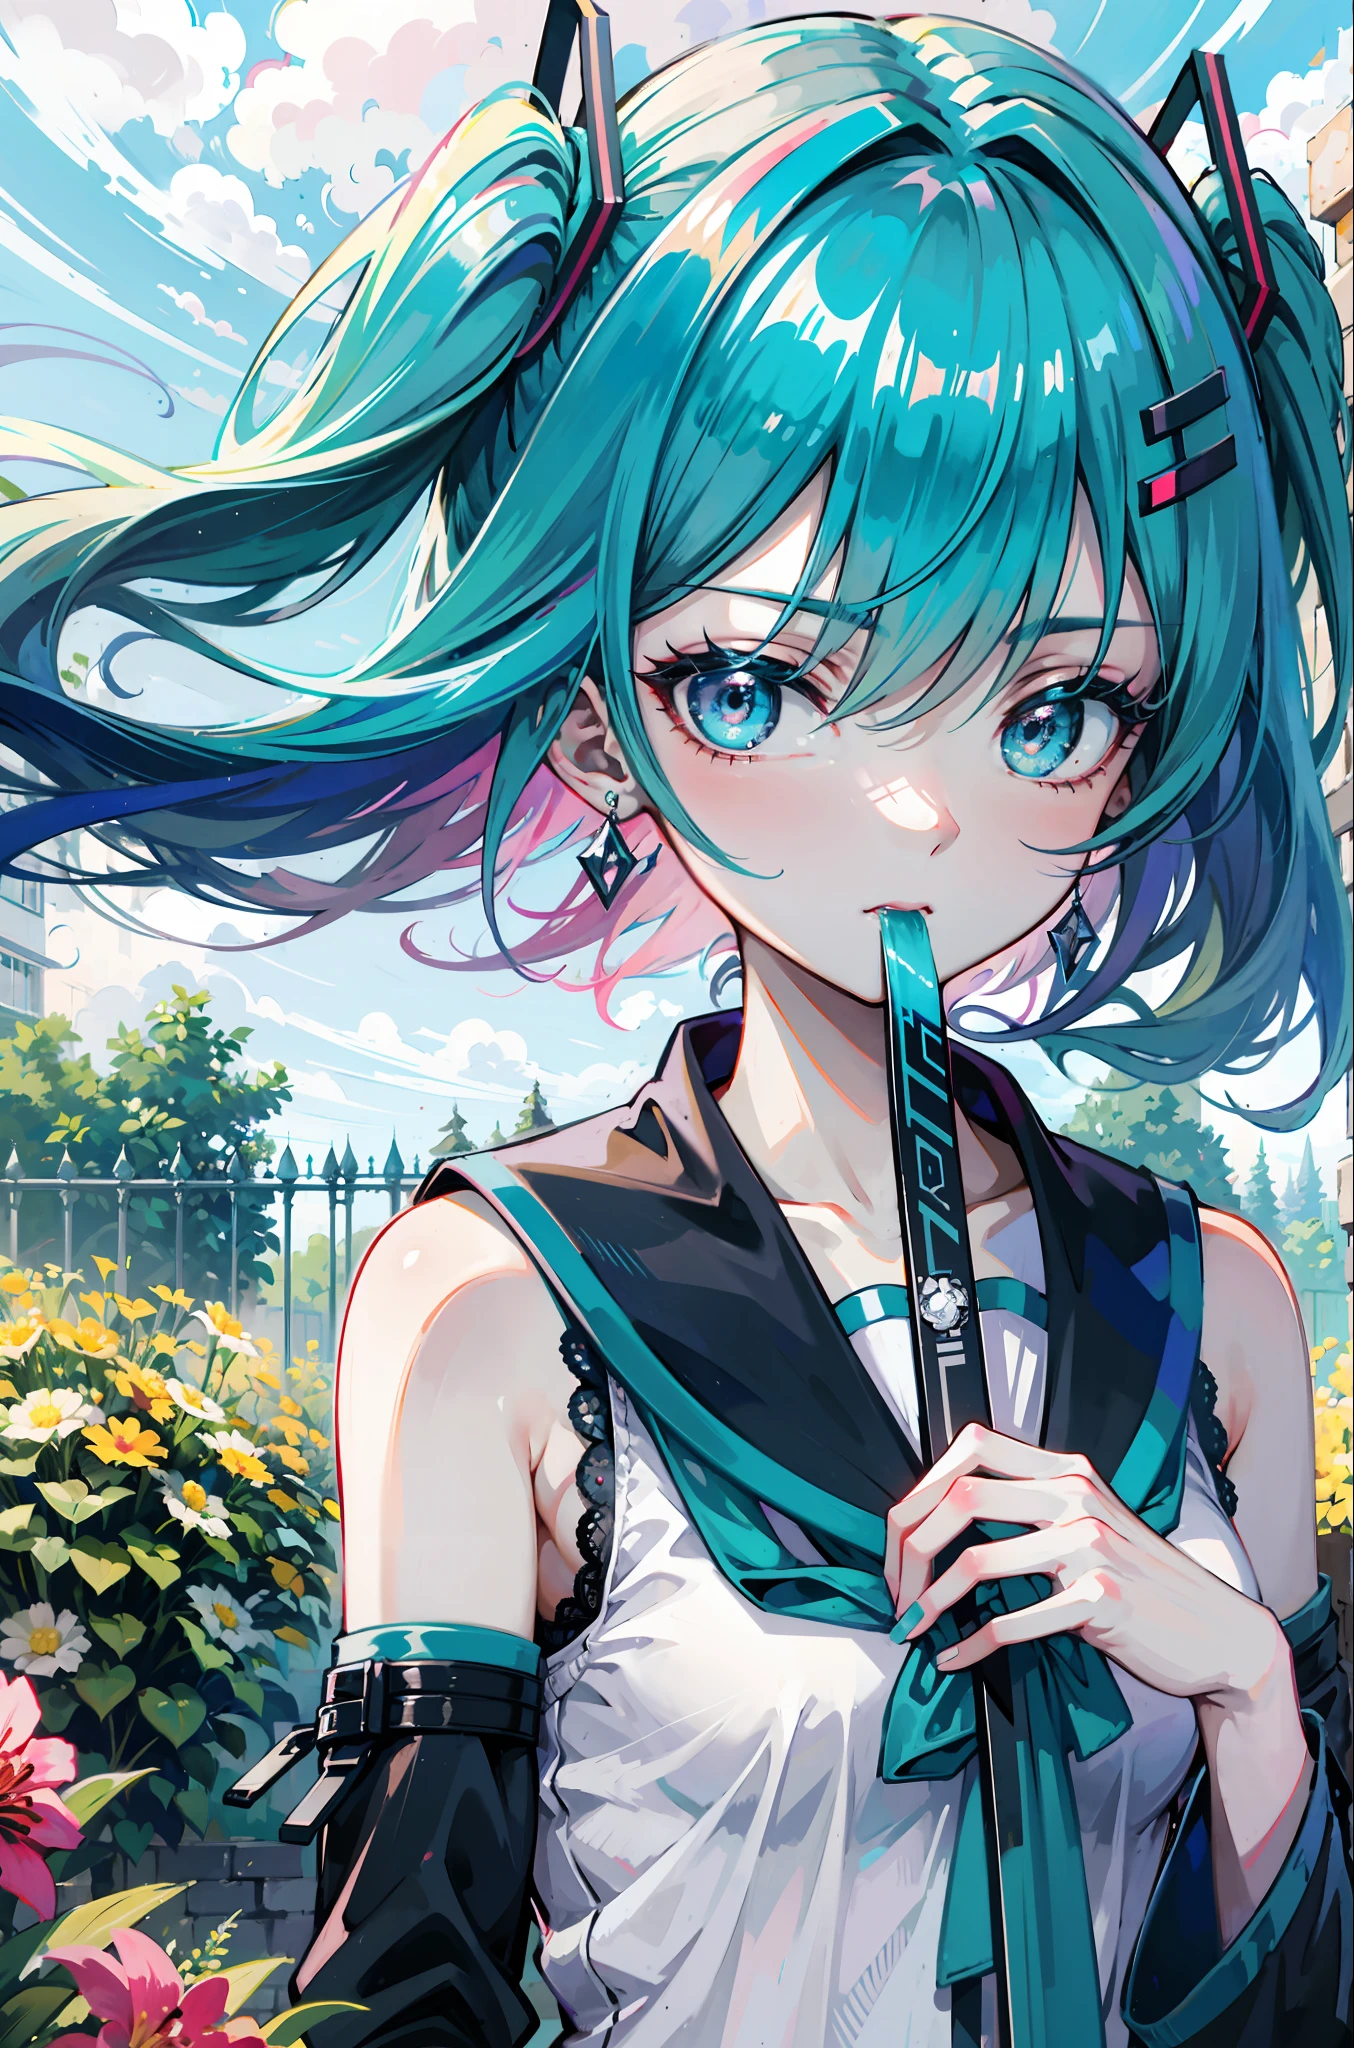 miku hatsune : 1.1, blue hair: 1.2, , Daytime: 1.2,In the garden: 1.1, flowers, Film lighting, Surrealism, UHD, accurate, Super detail, textured skin, High detail, Best quality, 8k,Thin bangs, (colorful splashes),colorful bubble,(shining), thick body, sleeveless, well drawn hands, mouth showing fangs